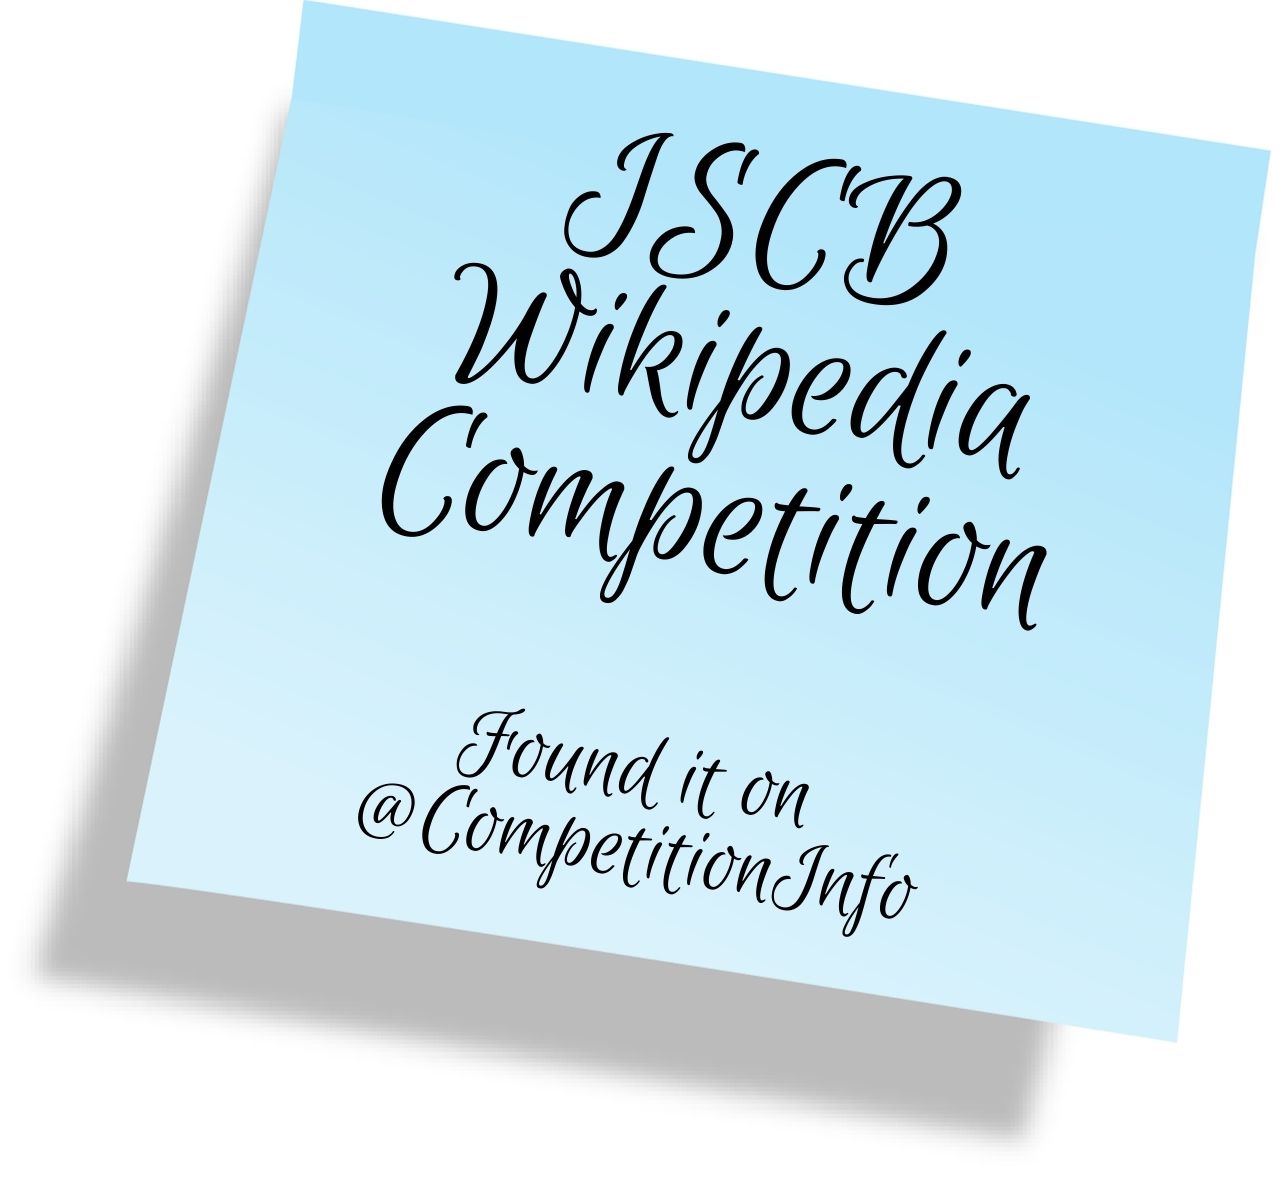 ISCB Wikipedia Competition